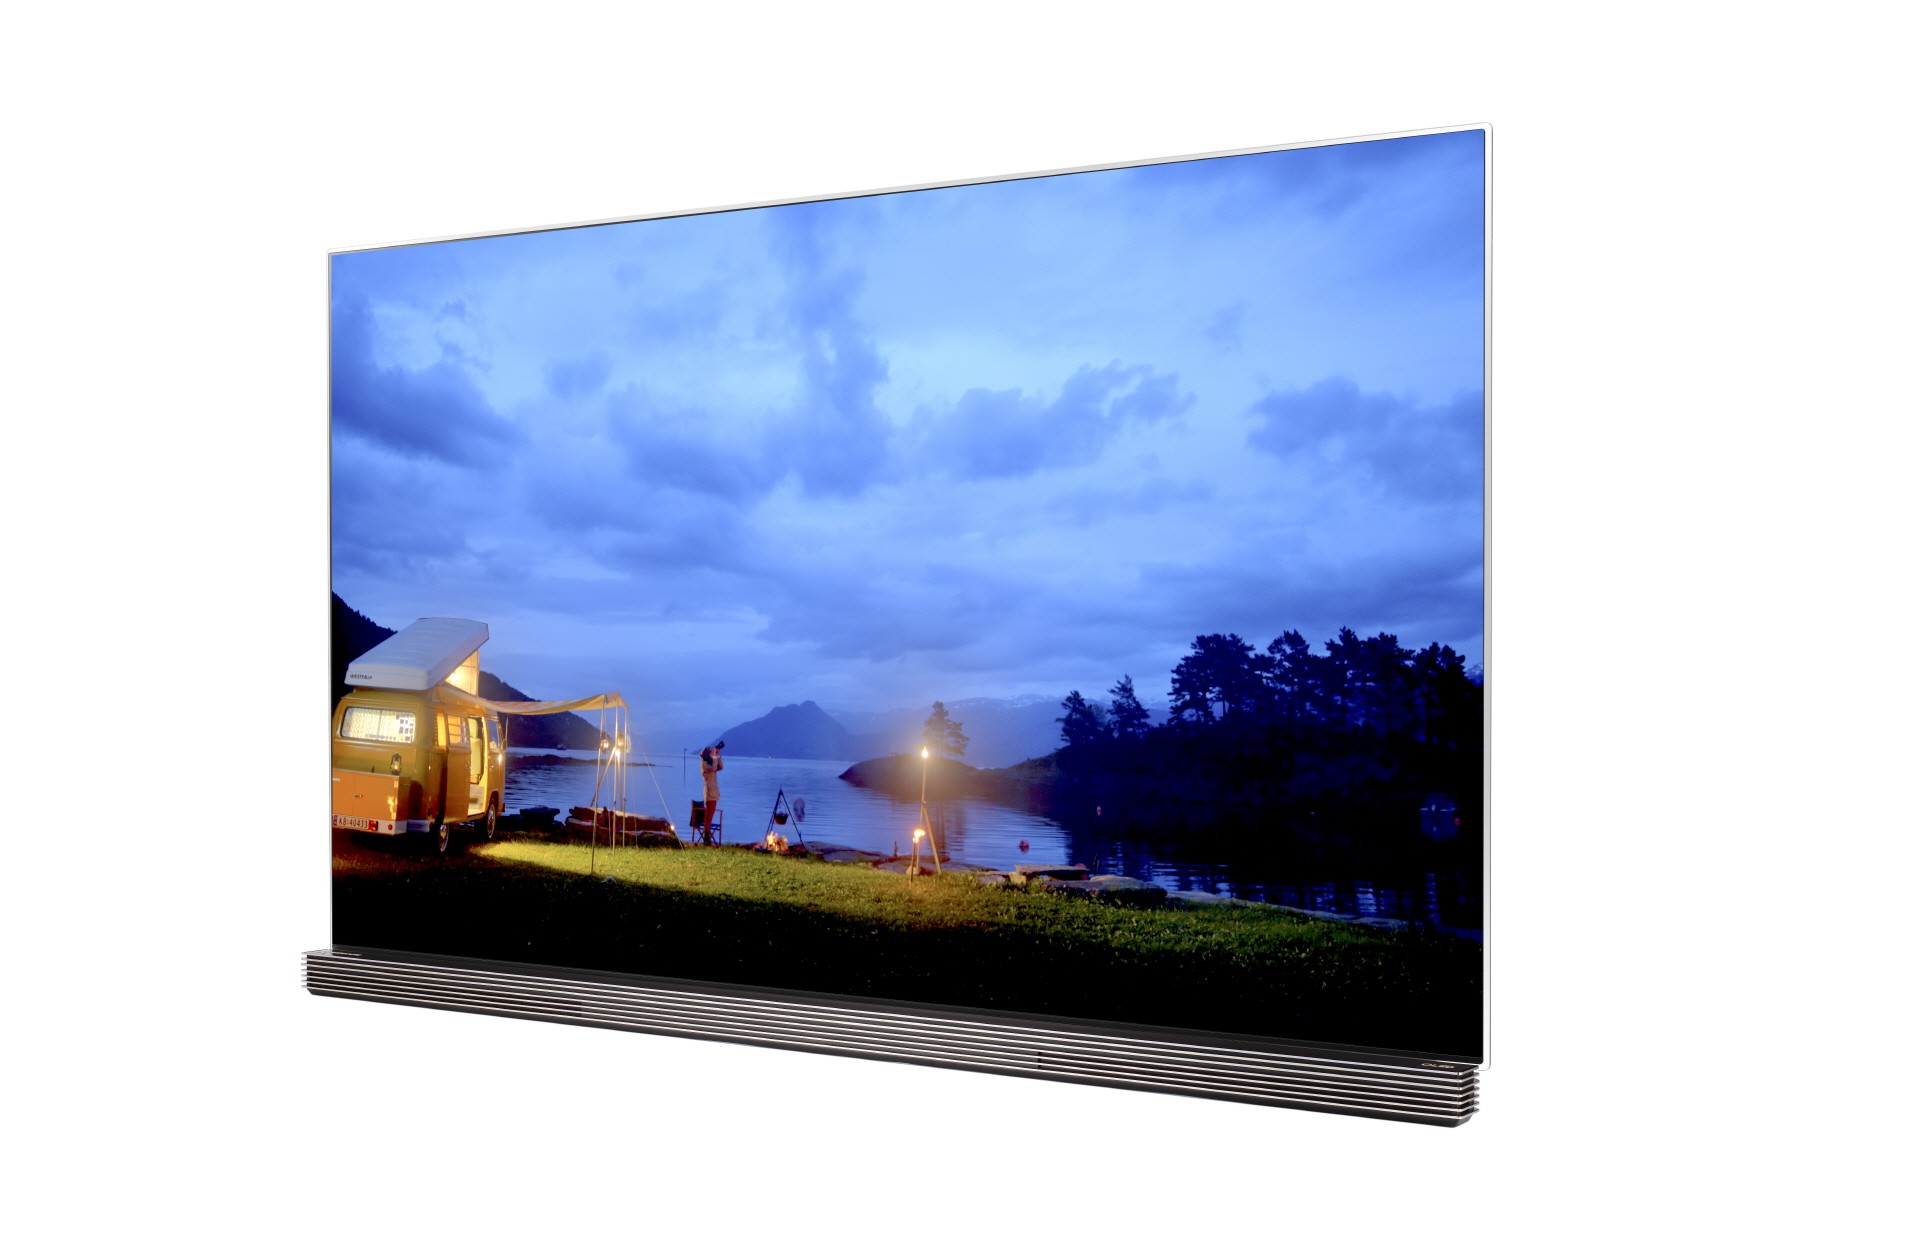 NEWEST LG OLED TVS COMPATIBLE WITH FULL RANGE OF HDR TECHNOLOGIES LG